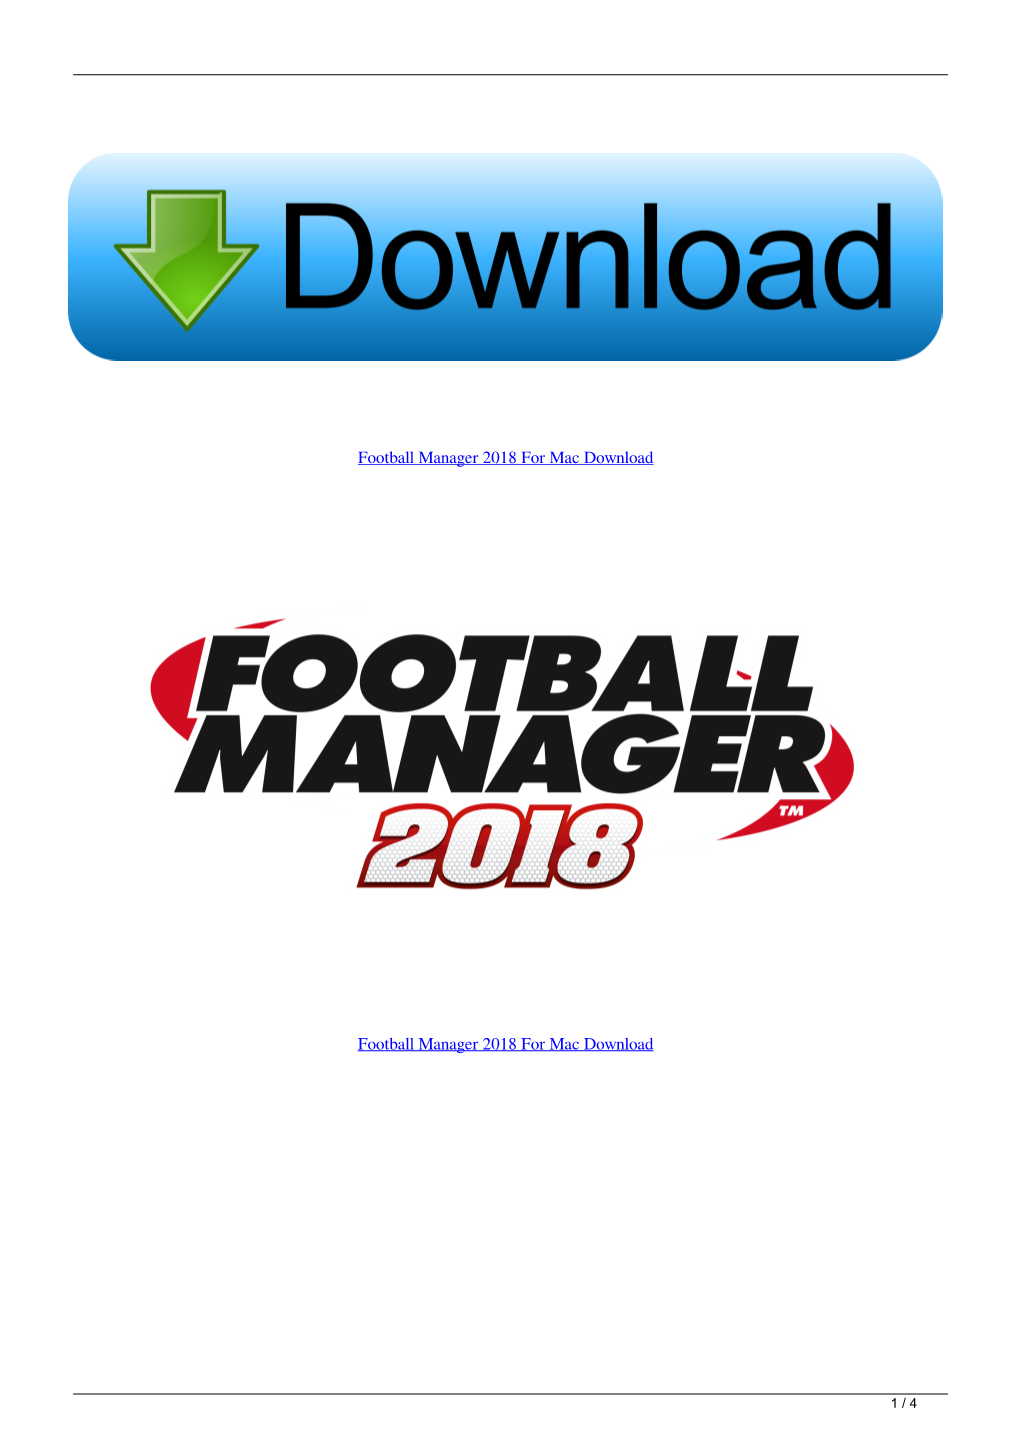 Football Manager 2018 for Mac Download